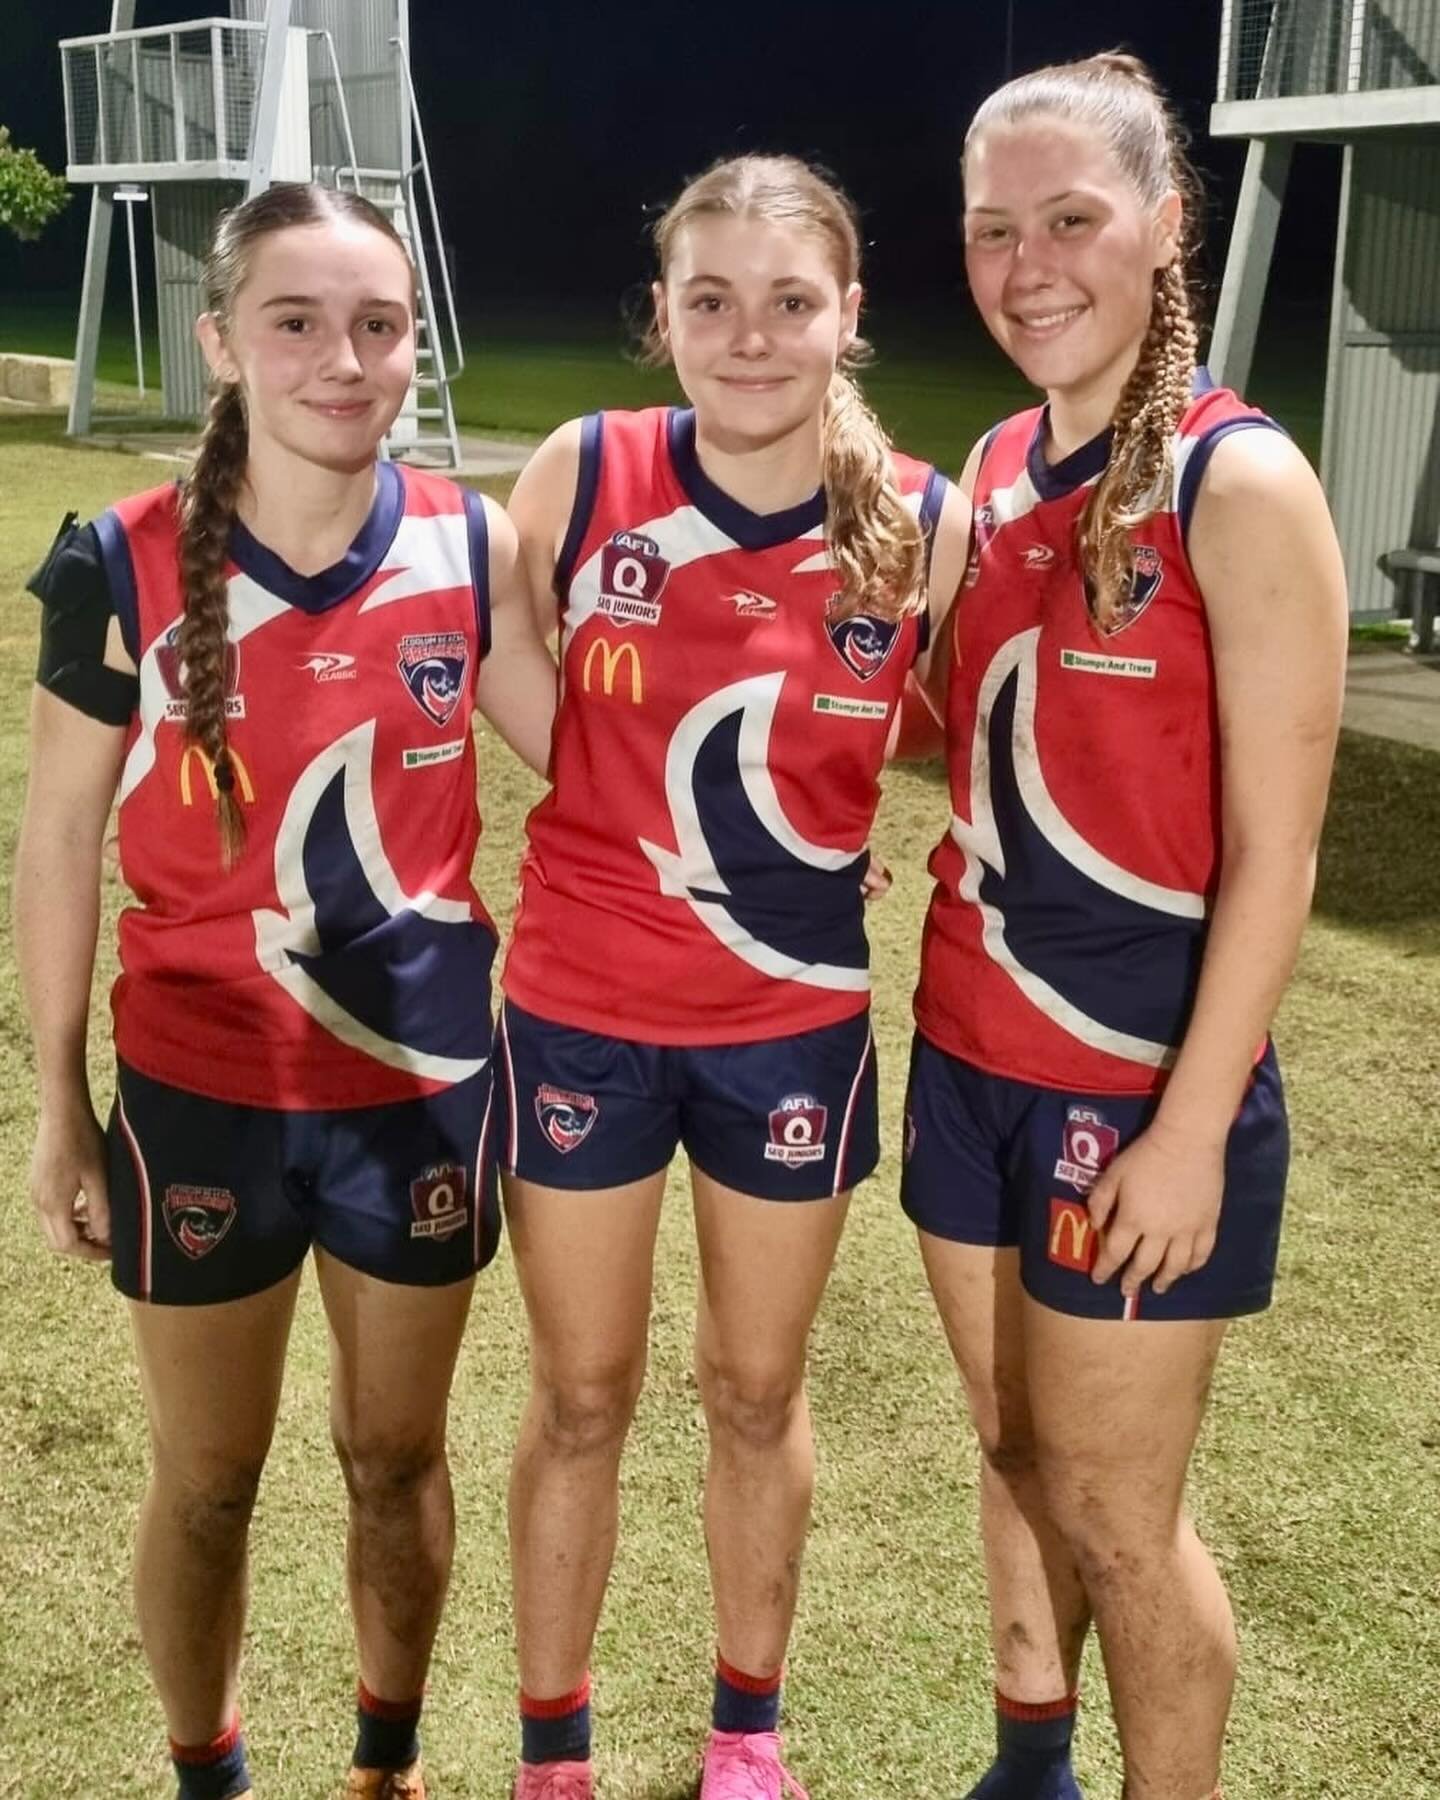 We hope all our mums had a wonderful Mother&rsquo;s Day 💐

The Breakers kicked off the weekend Friday night, under lights, down at Maroochydore. The U15 Girls came away with a convincing win - Awesome work 👏🏻 

Well done to all teams that competed